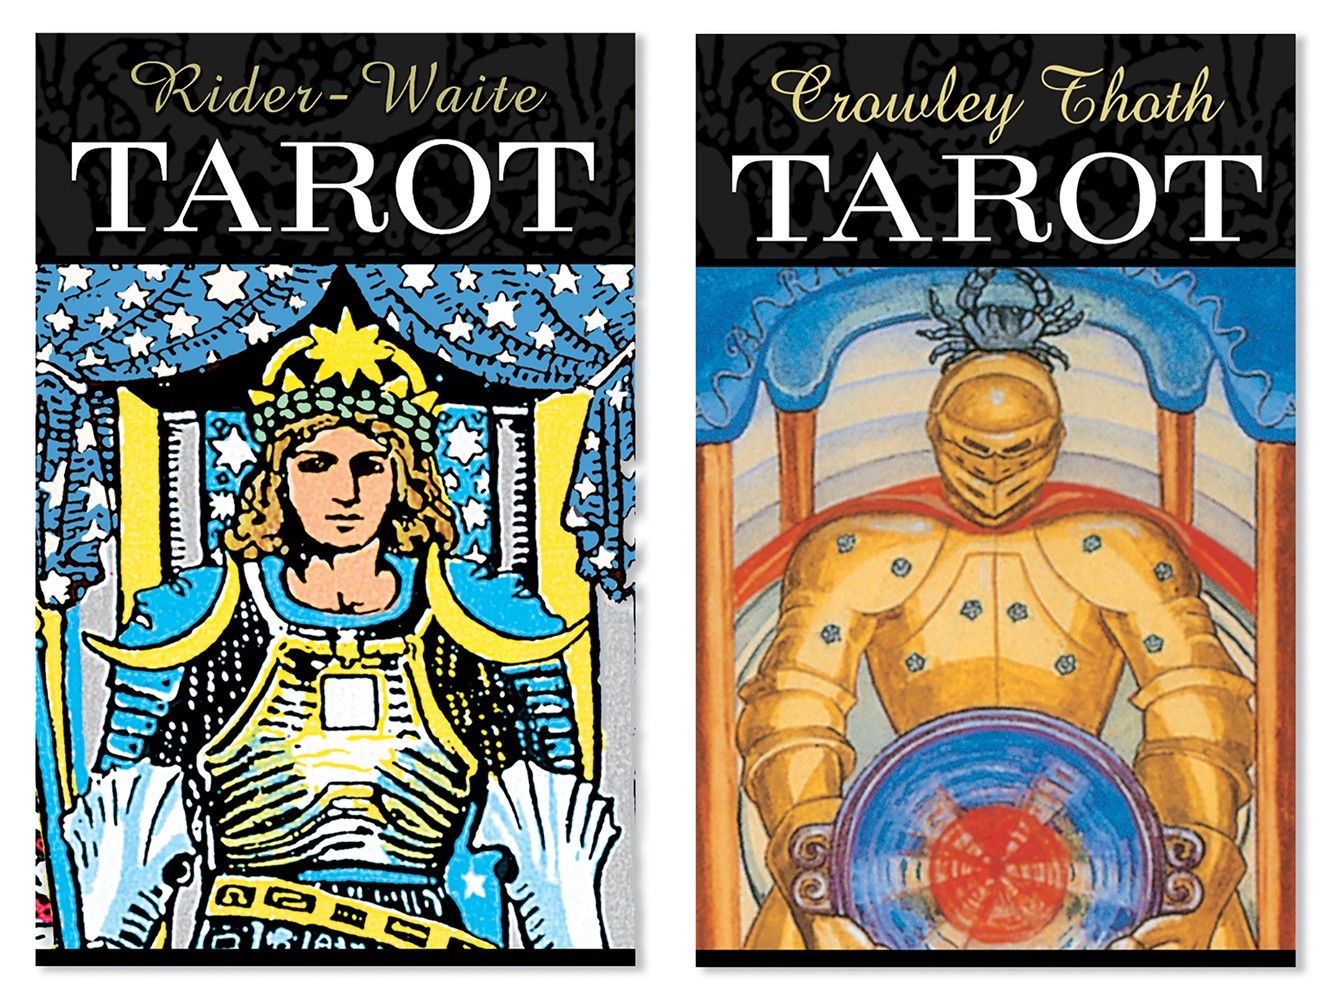 Side-by-side view of the Rider Waite Tarot box vs. Crowley Thoth Tarot box